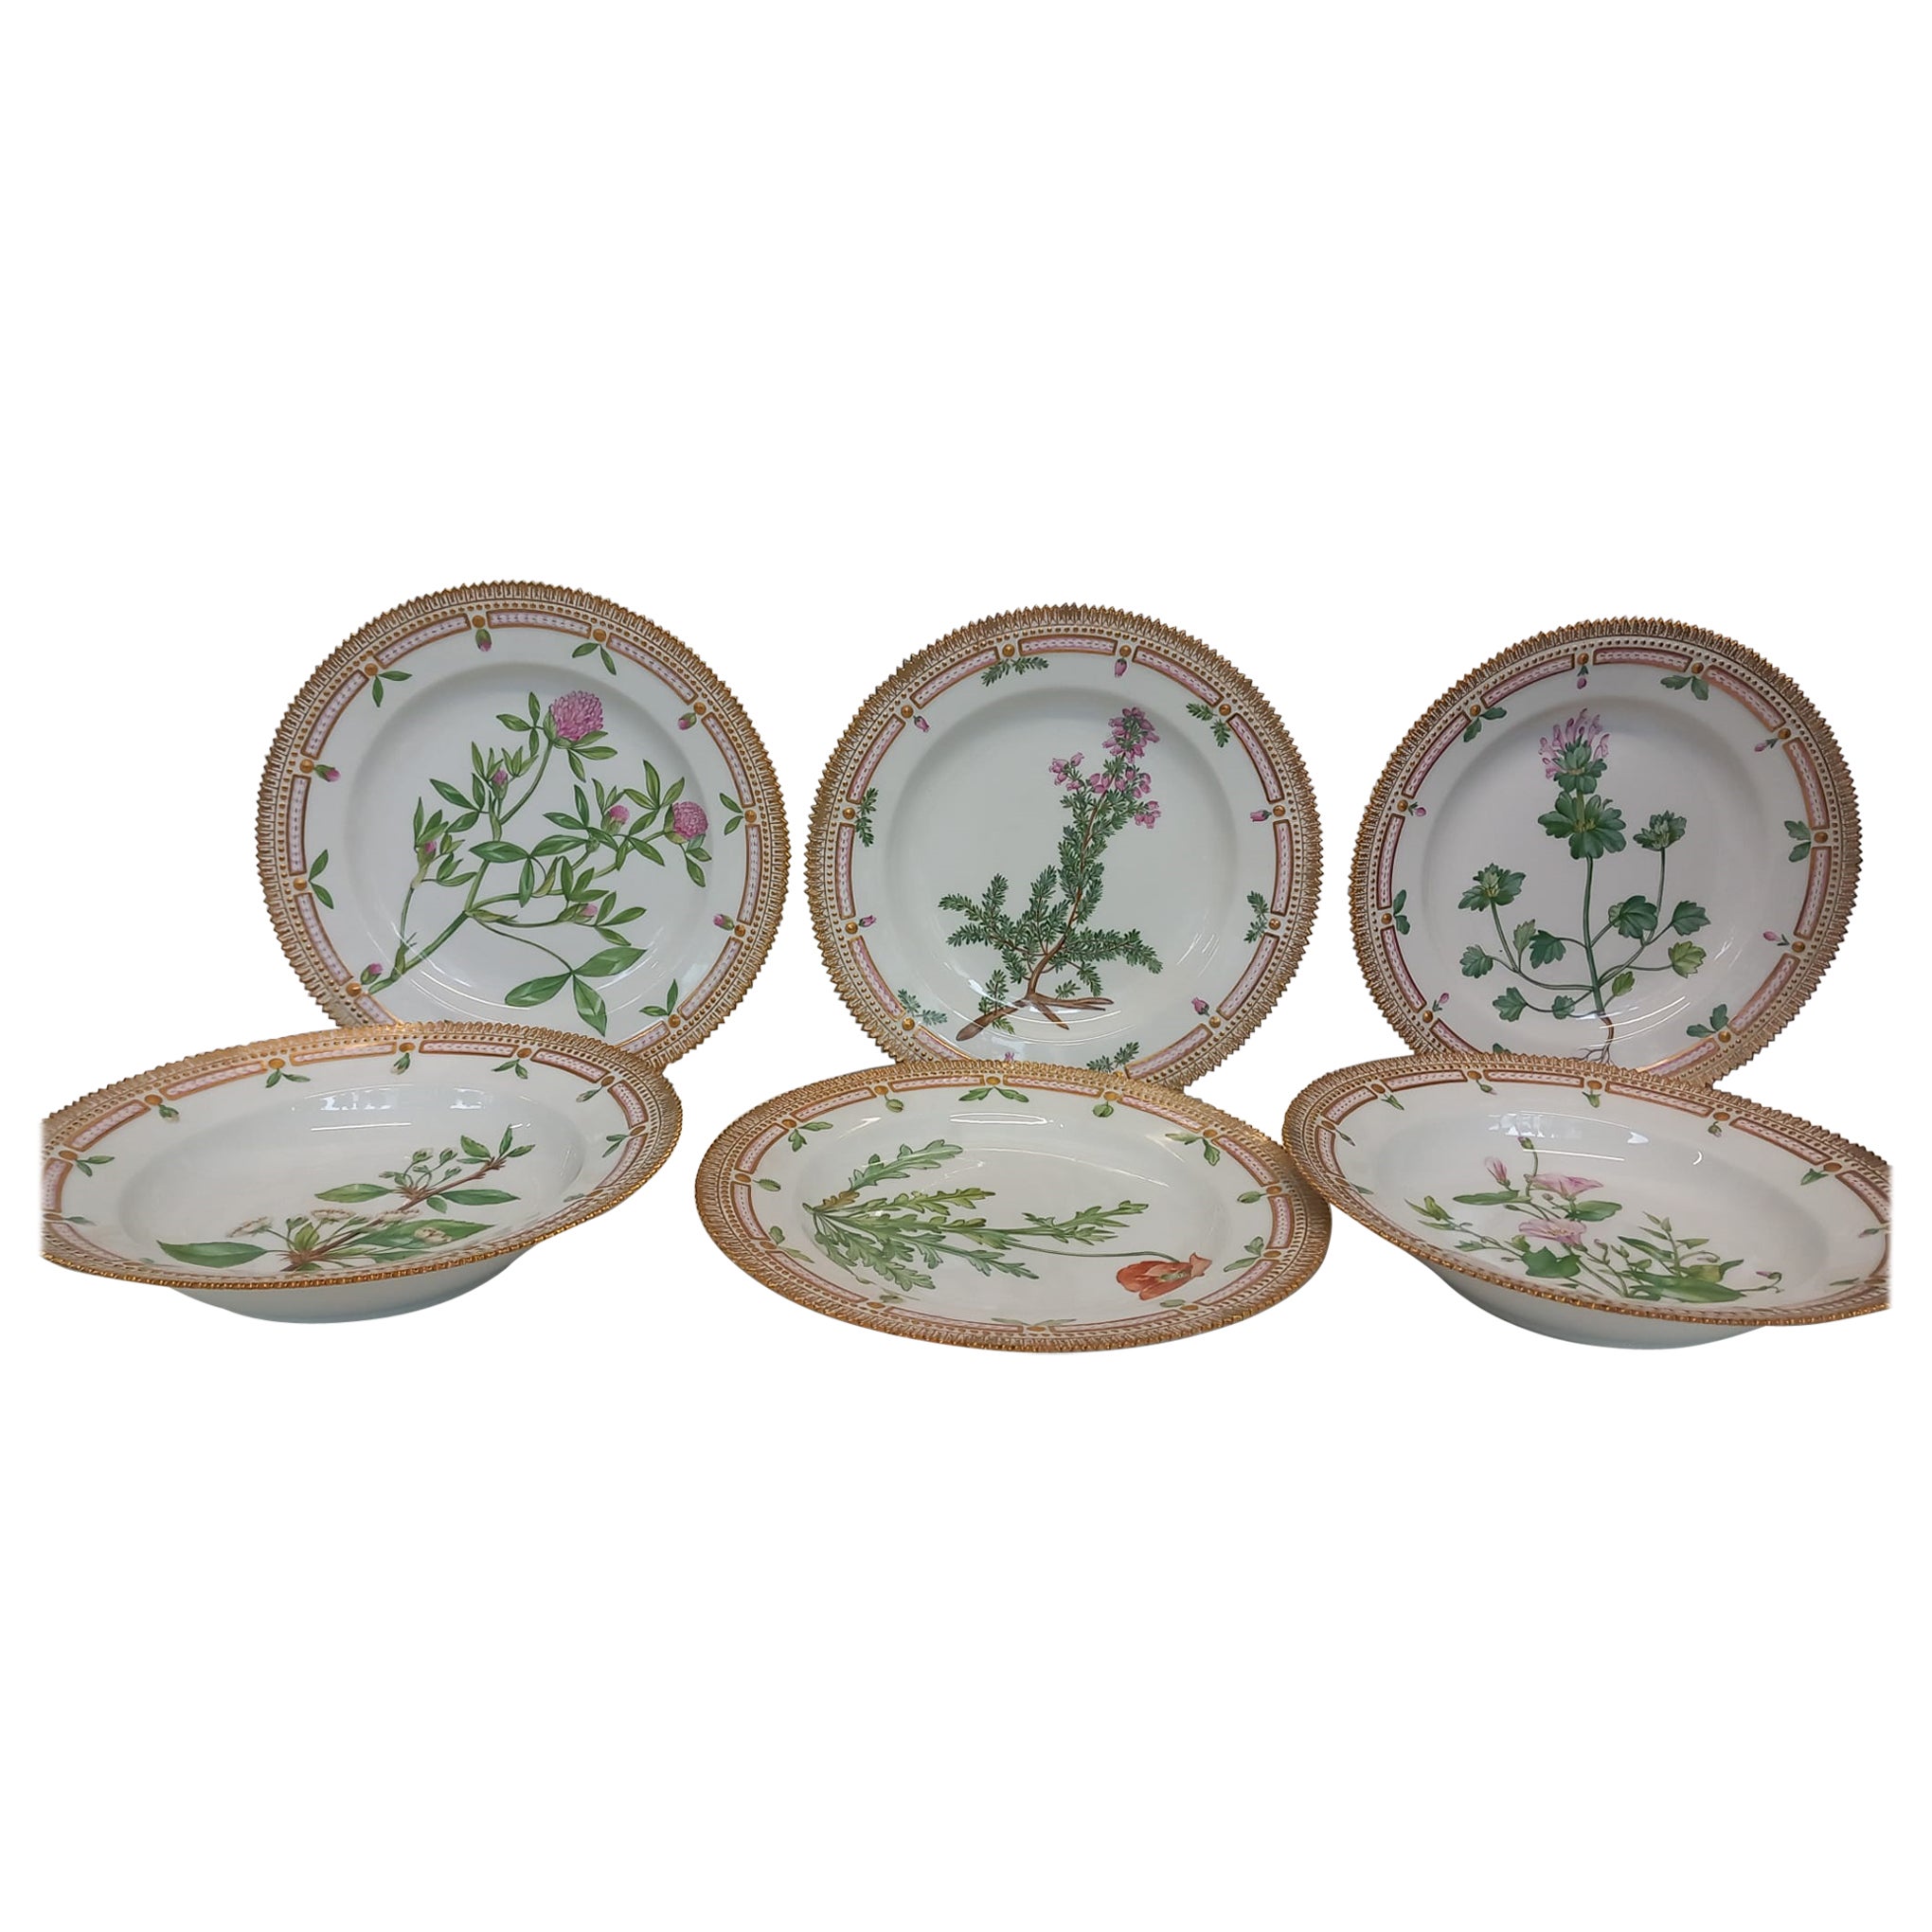 A wonderful set of six Flora Danica hand painted plates (4 dinner & 2 soup) For Sale